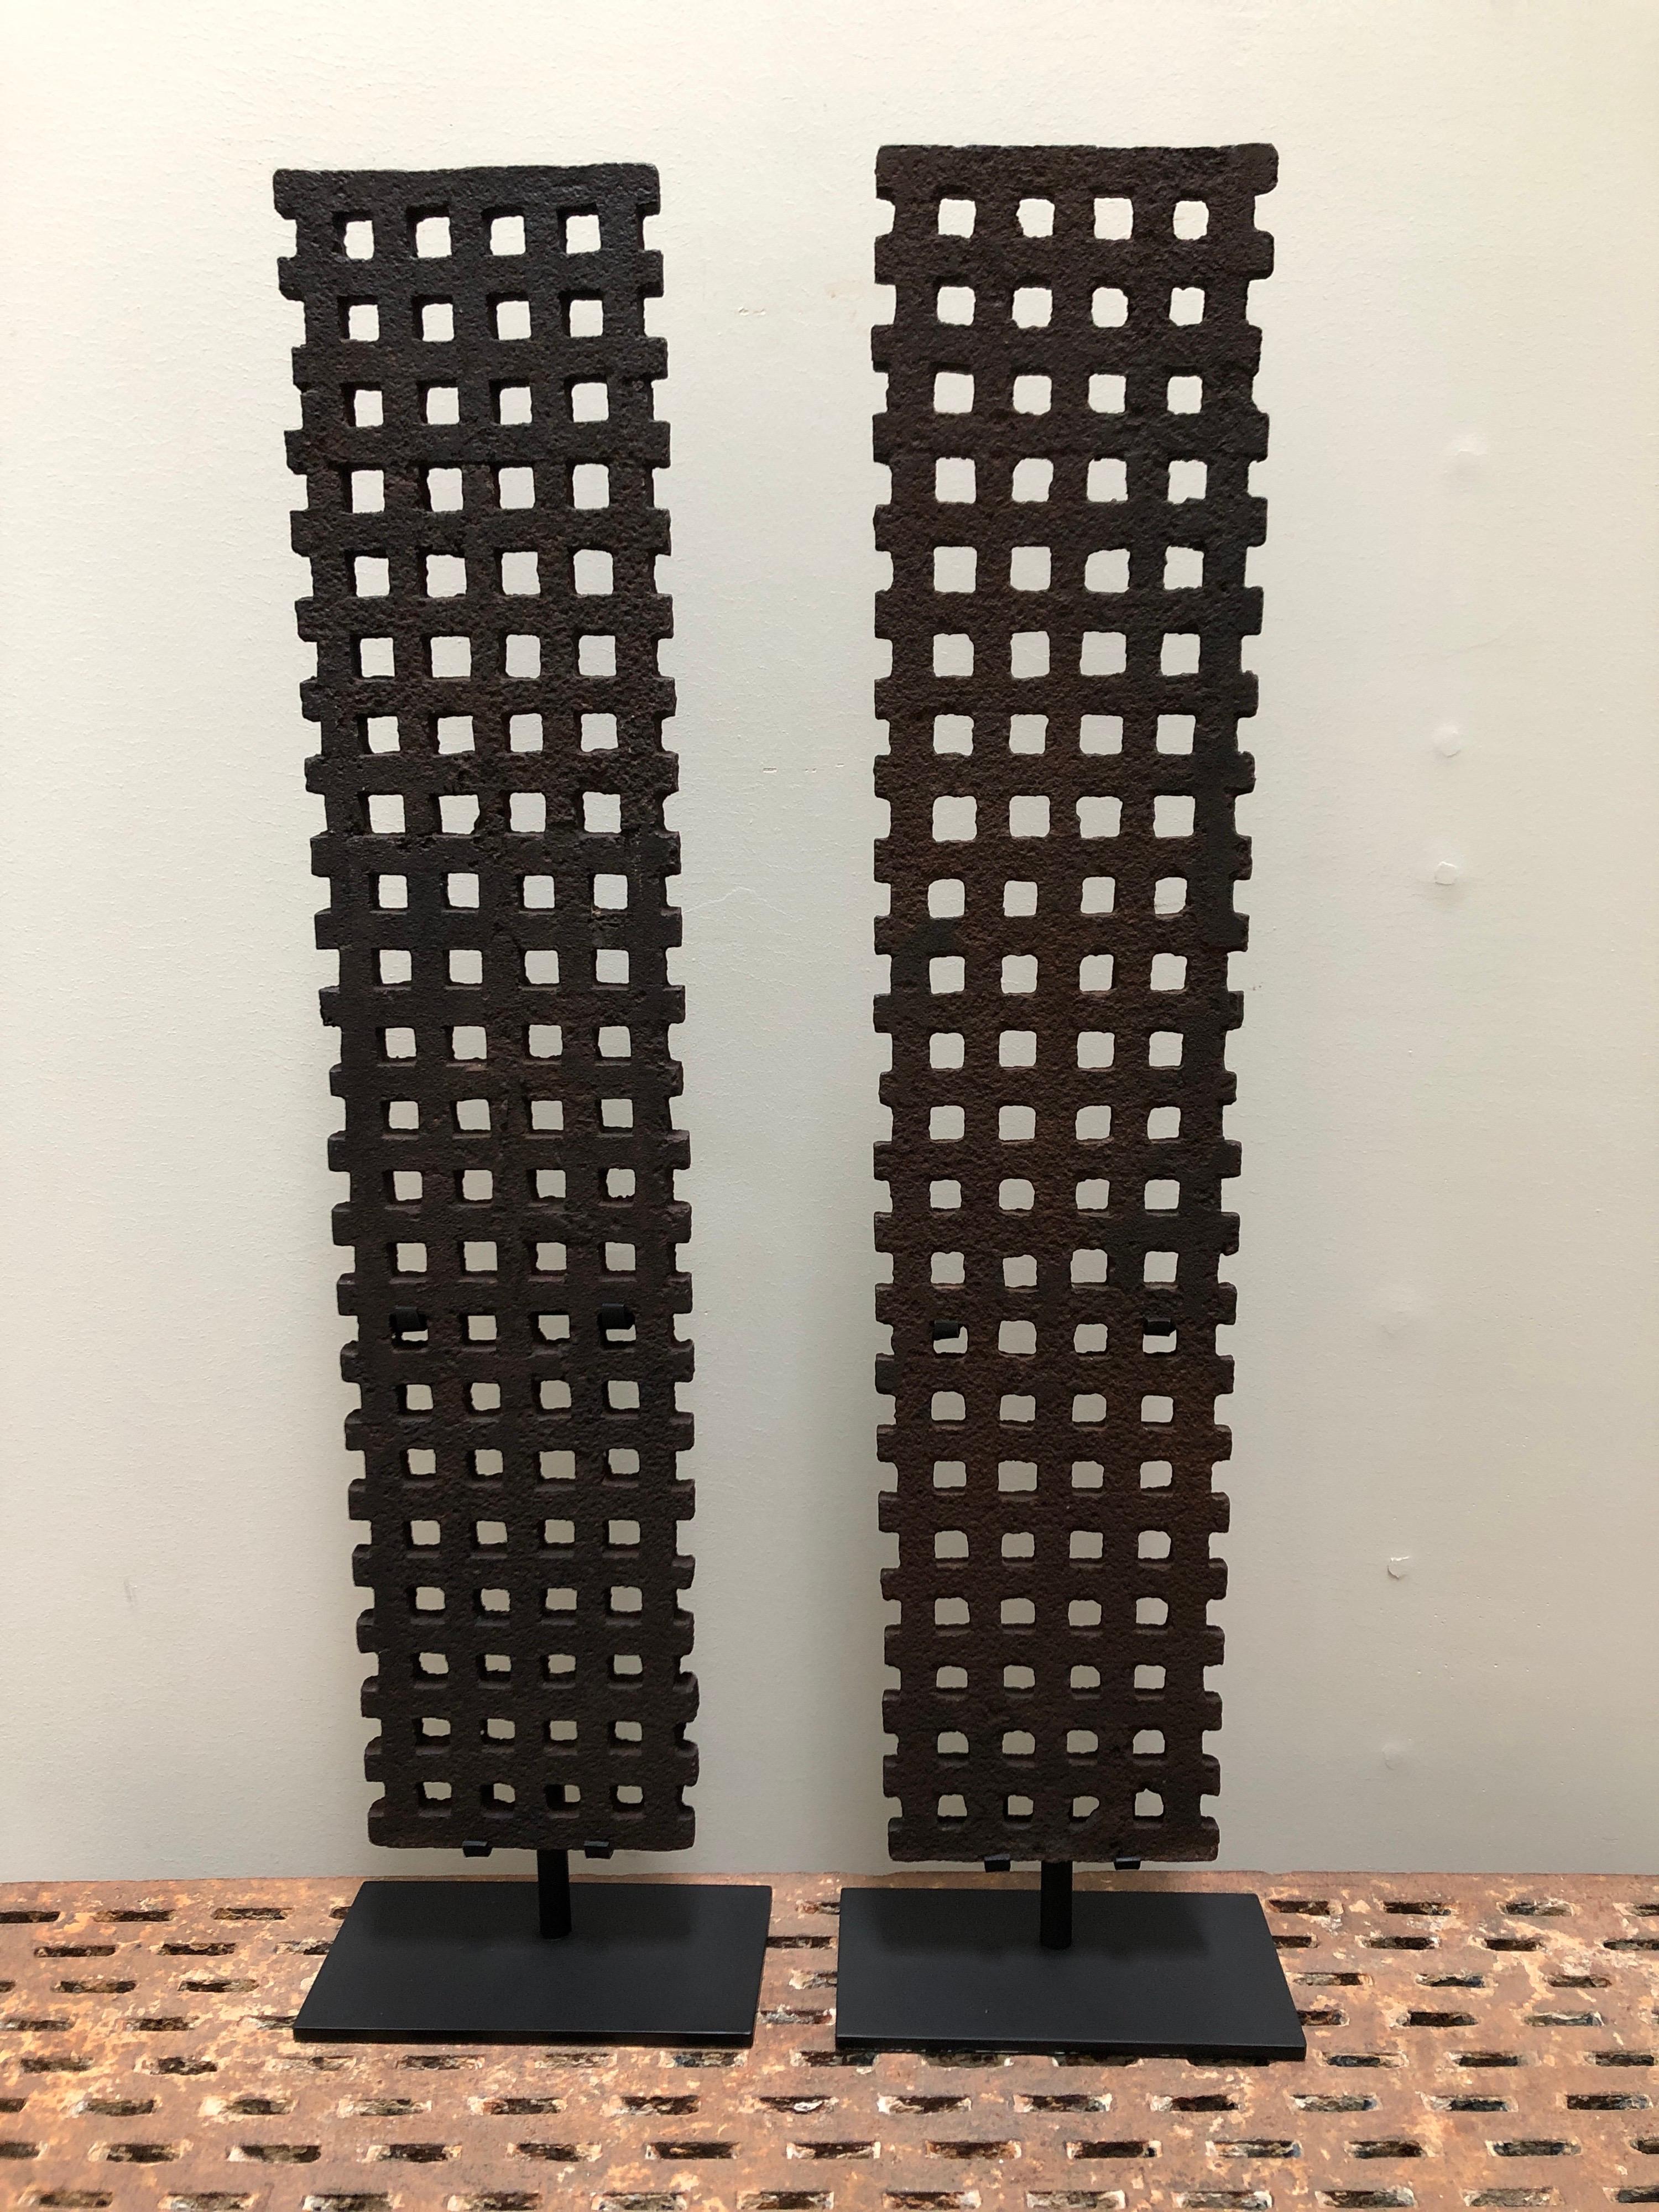 A pair of antique late 19th century cast iron grates from Philadelphia. Mounted on custom made steel stands that hide the supporting brackets. Great original color and textured surface from exposure. They measure 30 1/2